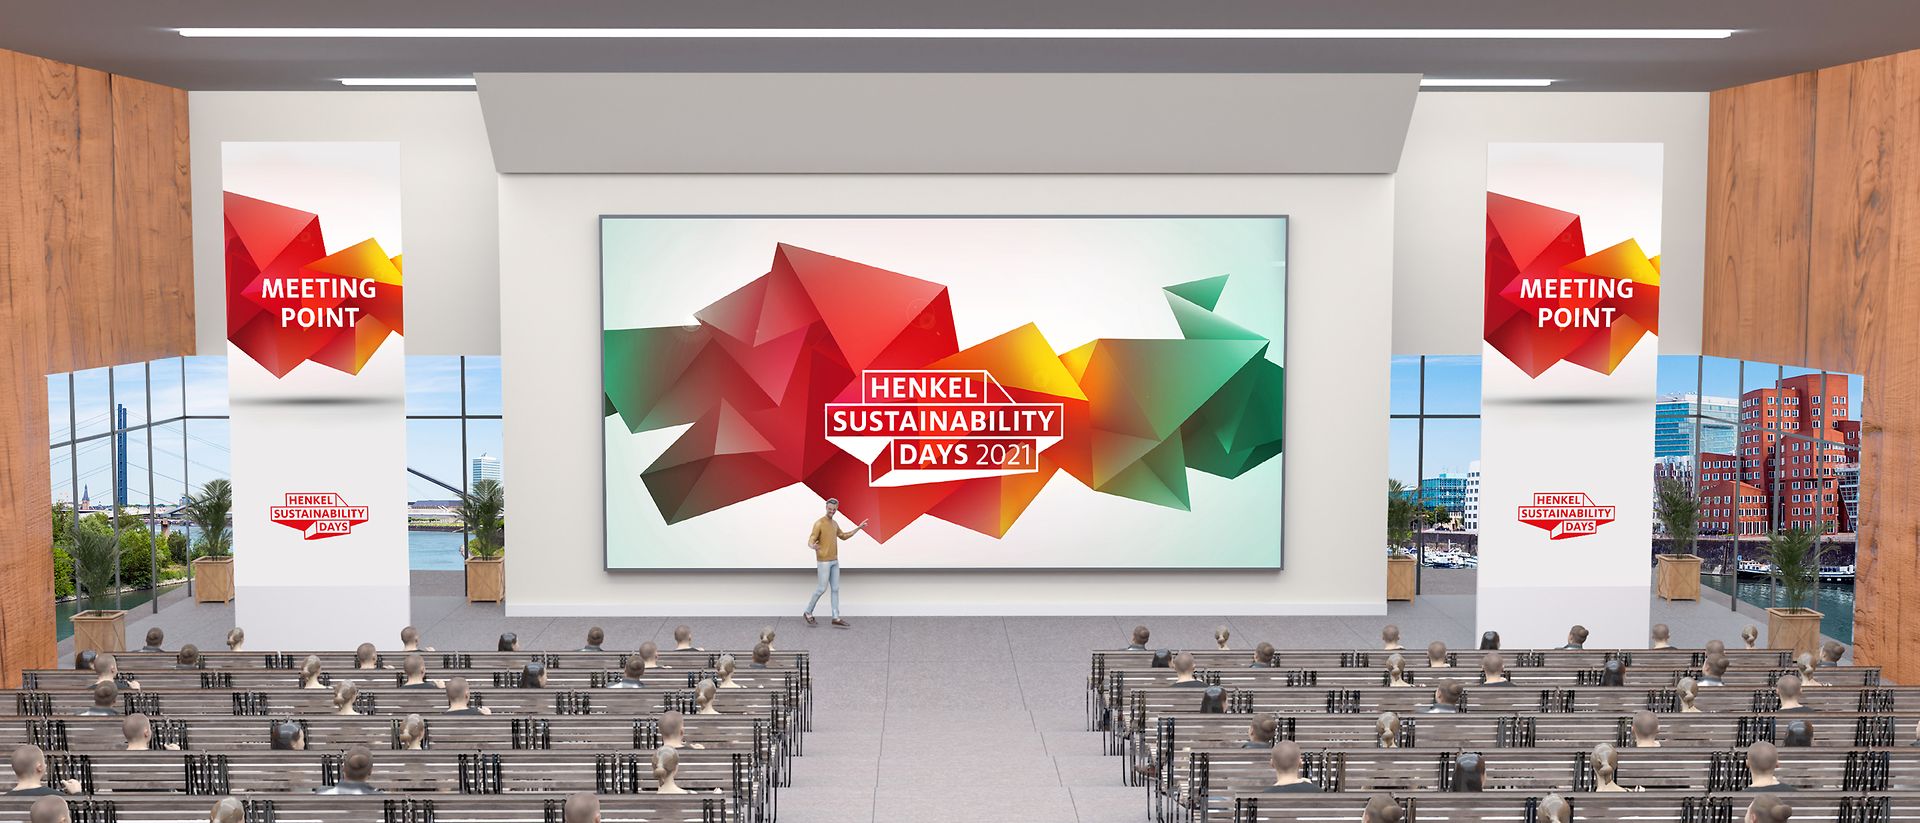 The Sustainability Days 2021 will take place at the virtual venue Henkel Adhesives Forum